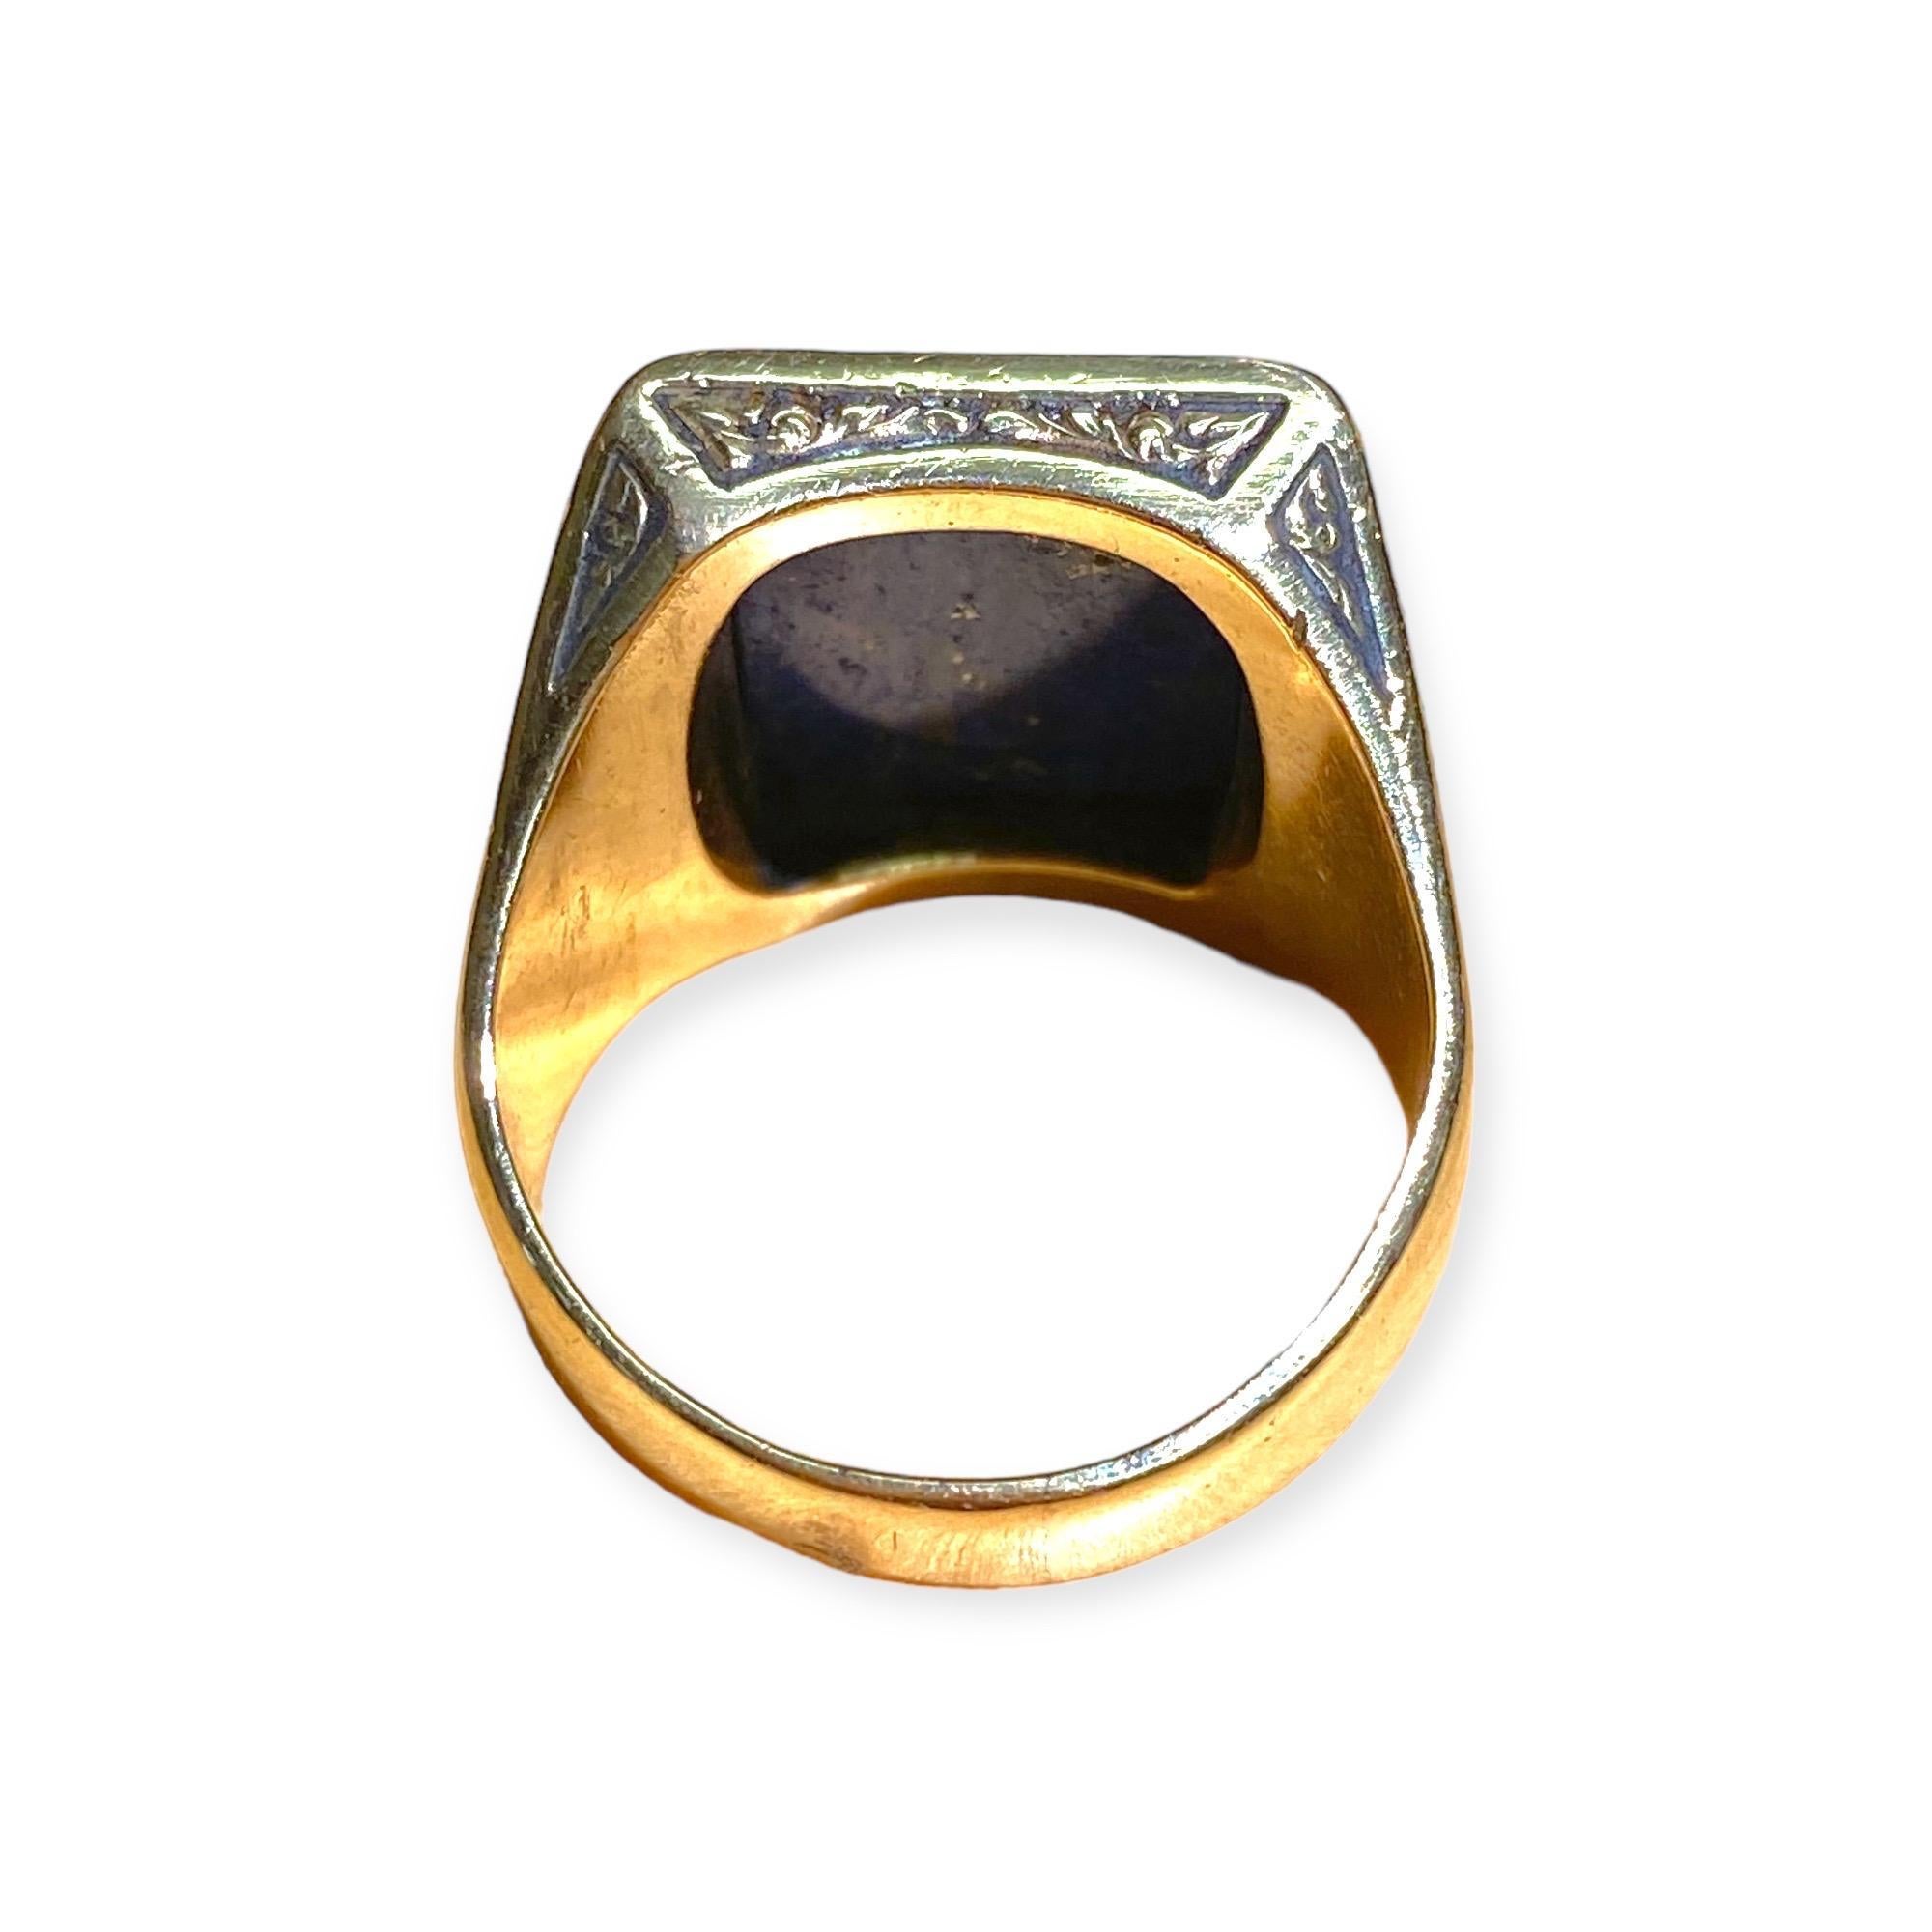 Vintage 18K Gold Lapis Lazuli Signet Ring In Good Condition For Sale In Henderson, NV